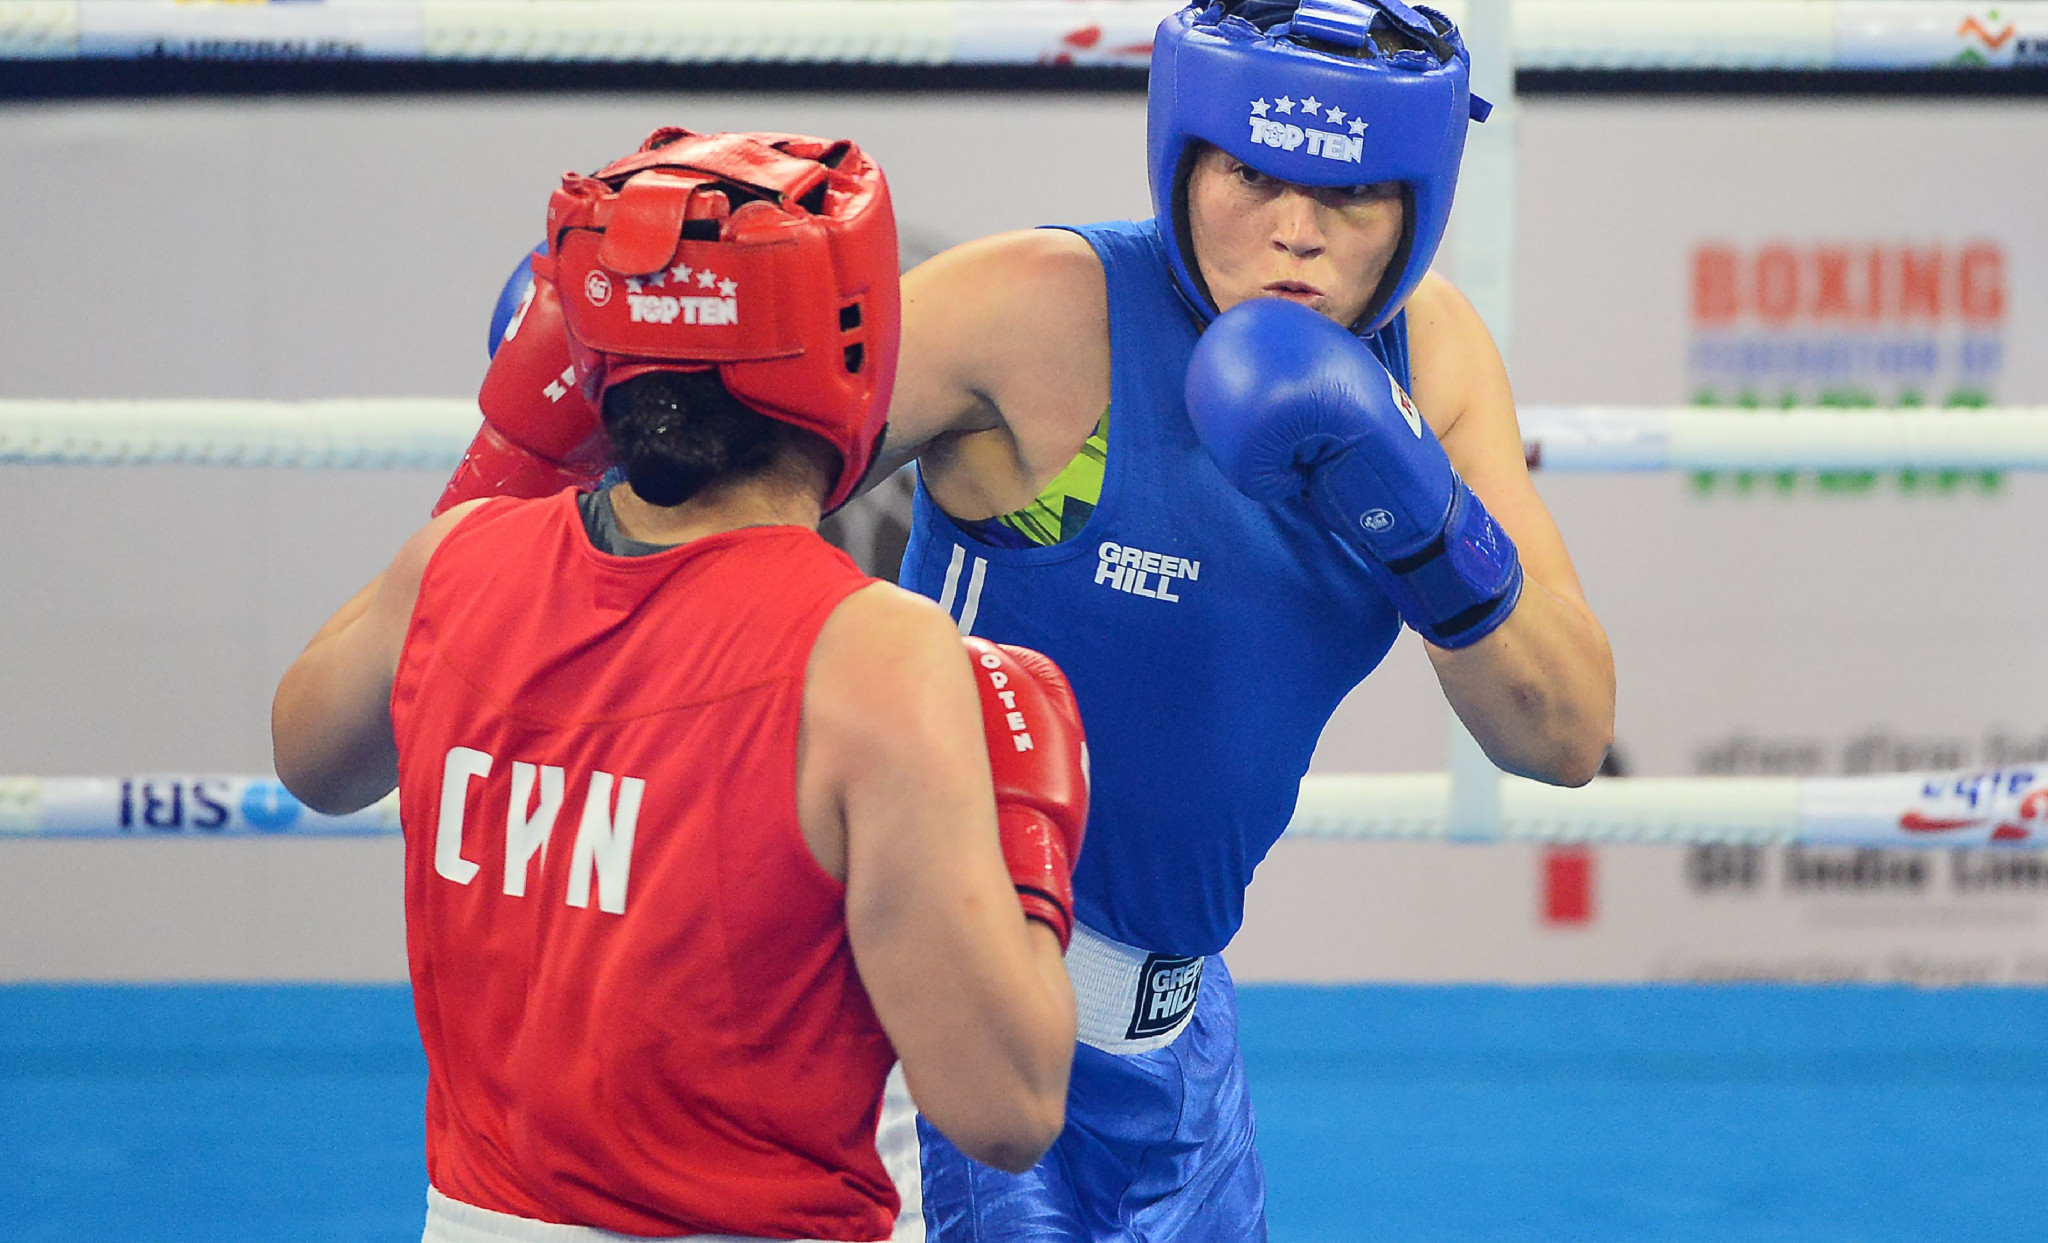 AIBA to organise training camp for boxers from Africa, Asia and the Americas in Russia in July